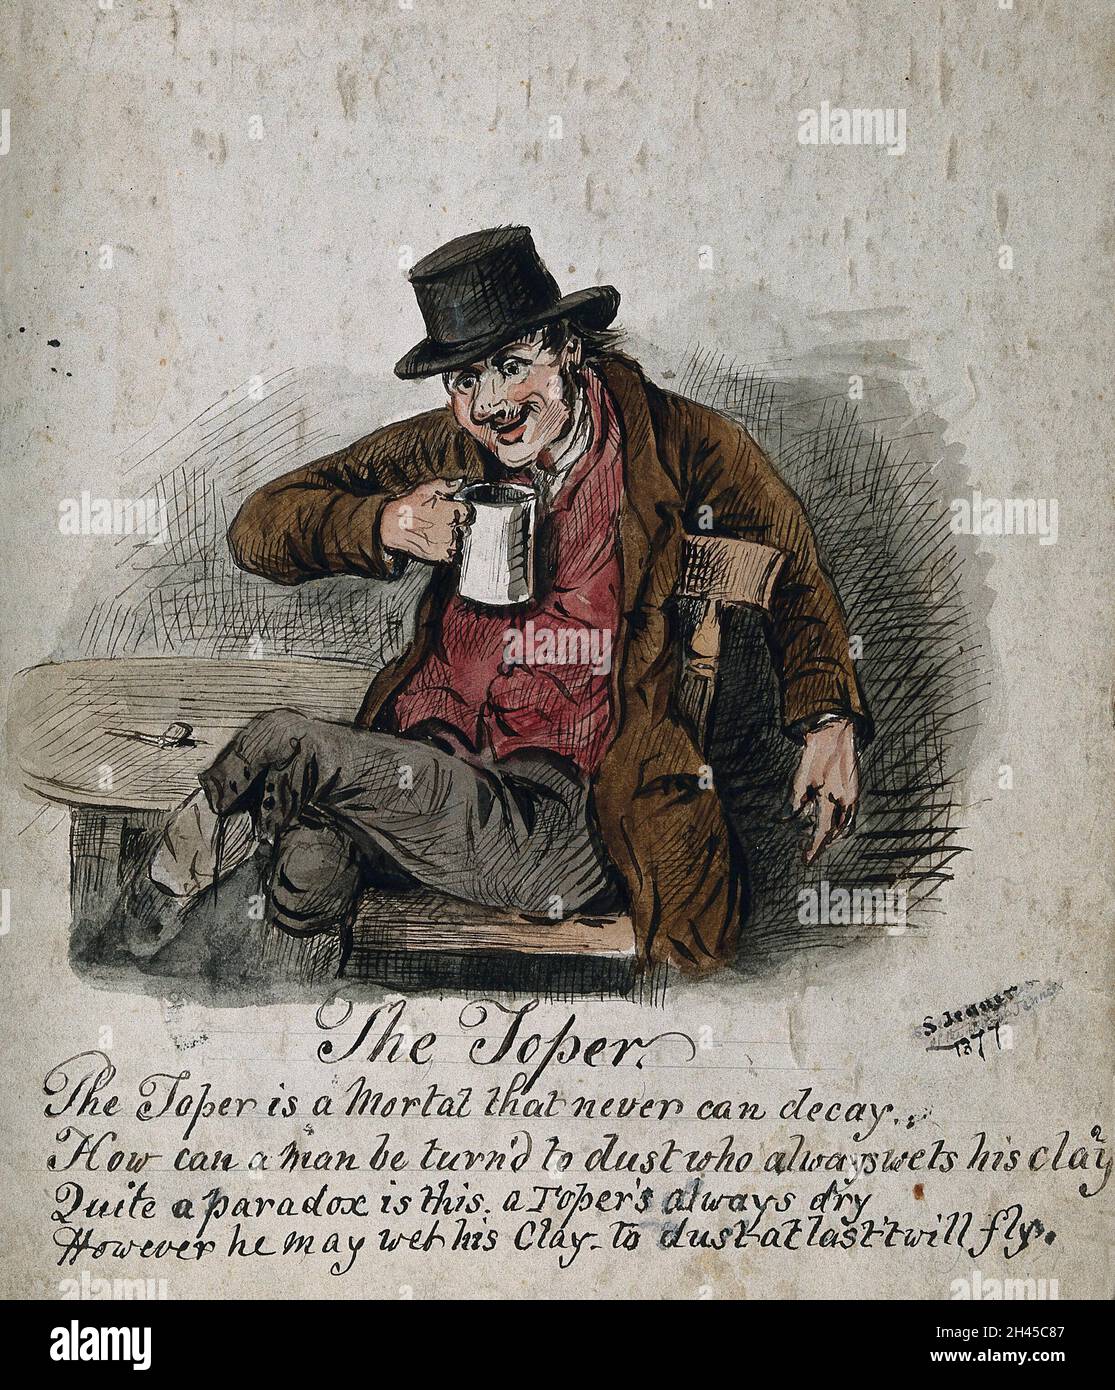 A drunkard wearing a hat, seated, drinking. Watercolour and ink by S. Jenner, 1877. Stock Photo